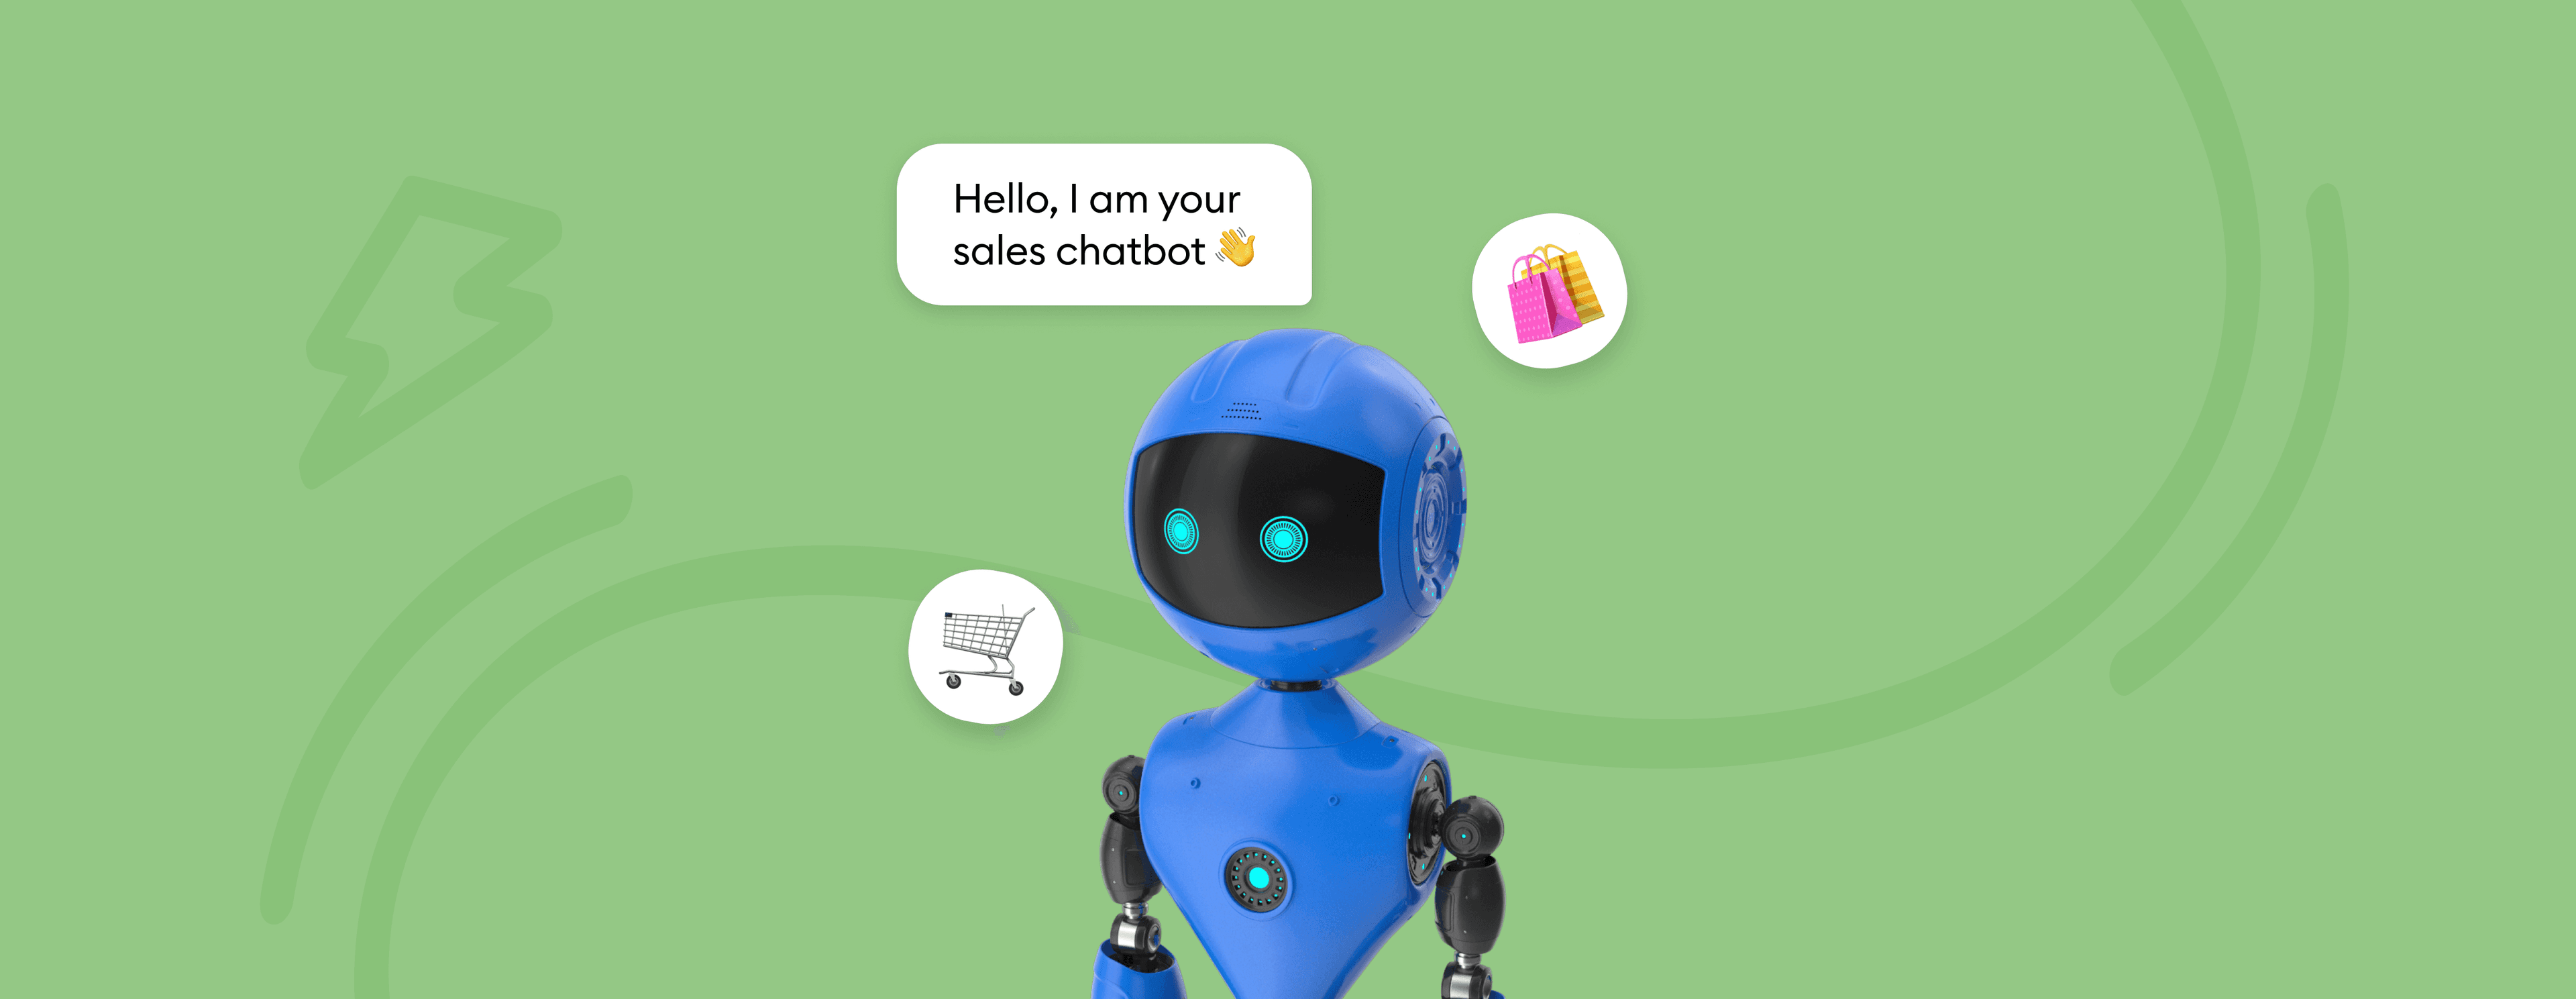 sales chatbot cover image